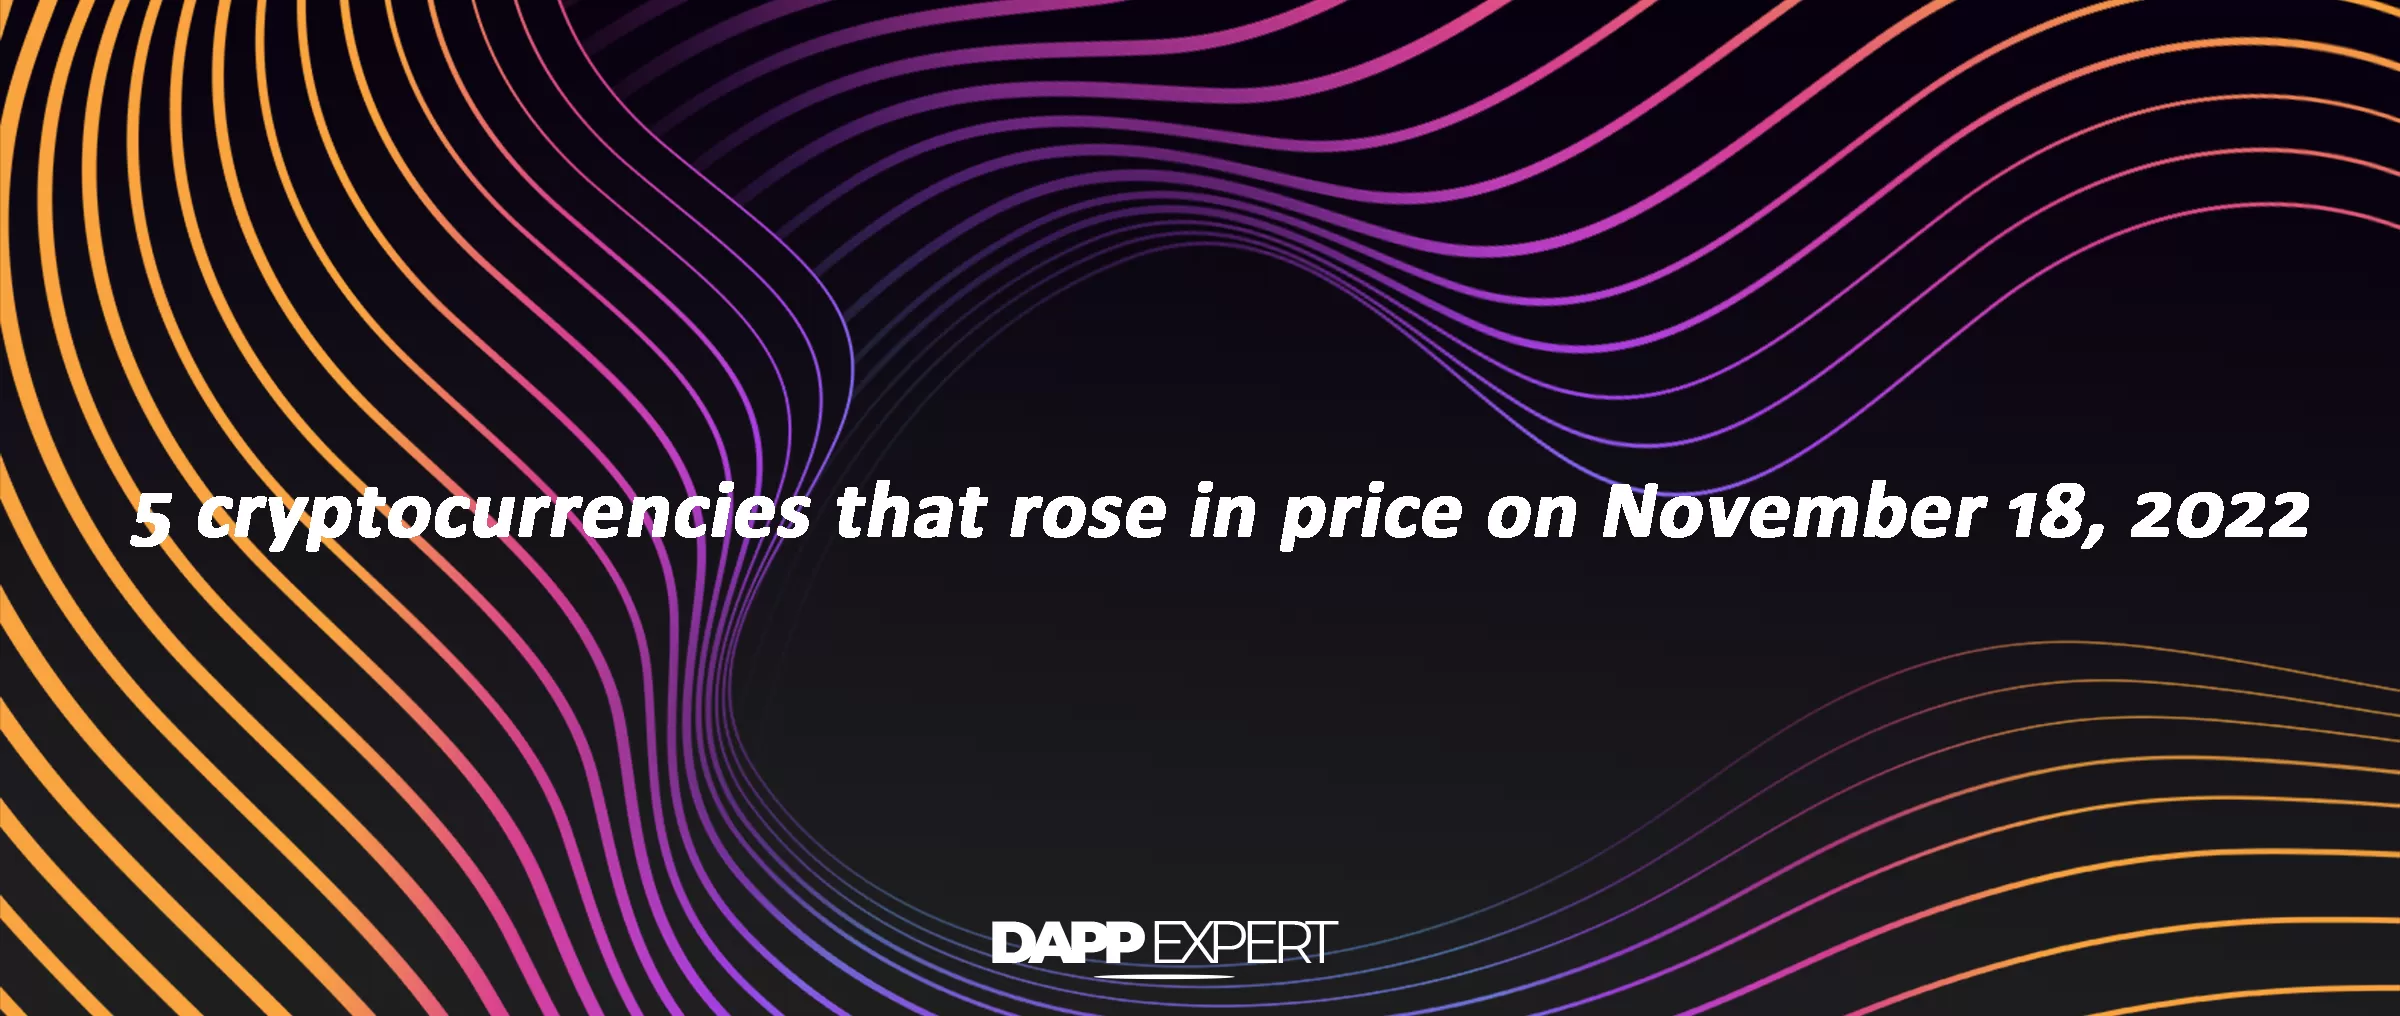 5 cryptocurrencies that rose in price on November 18, 2022